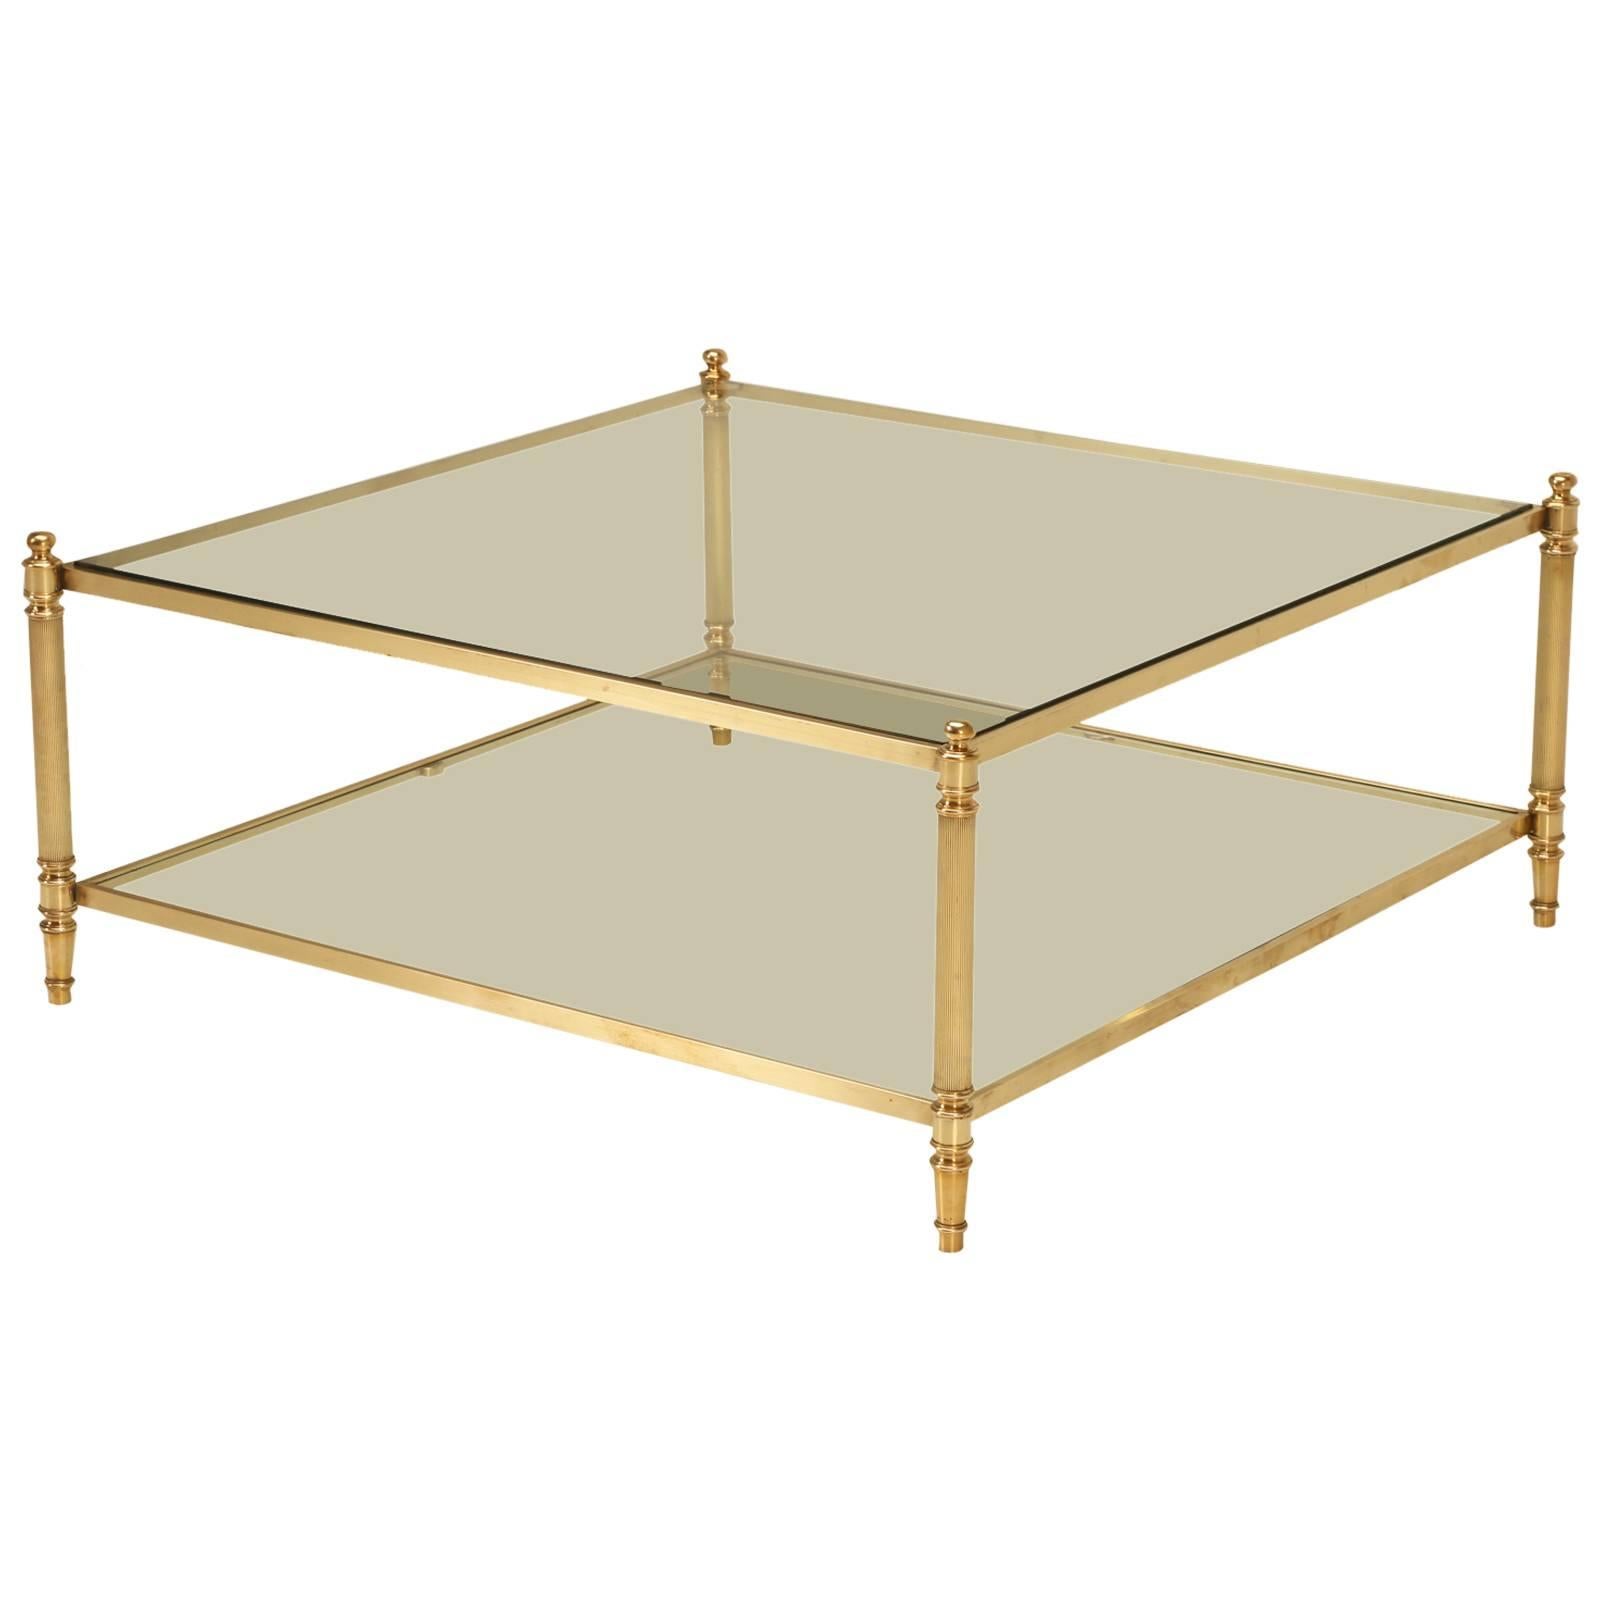 French Mid-Century Modern Brass Coffee Table